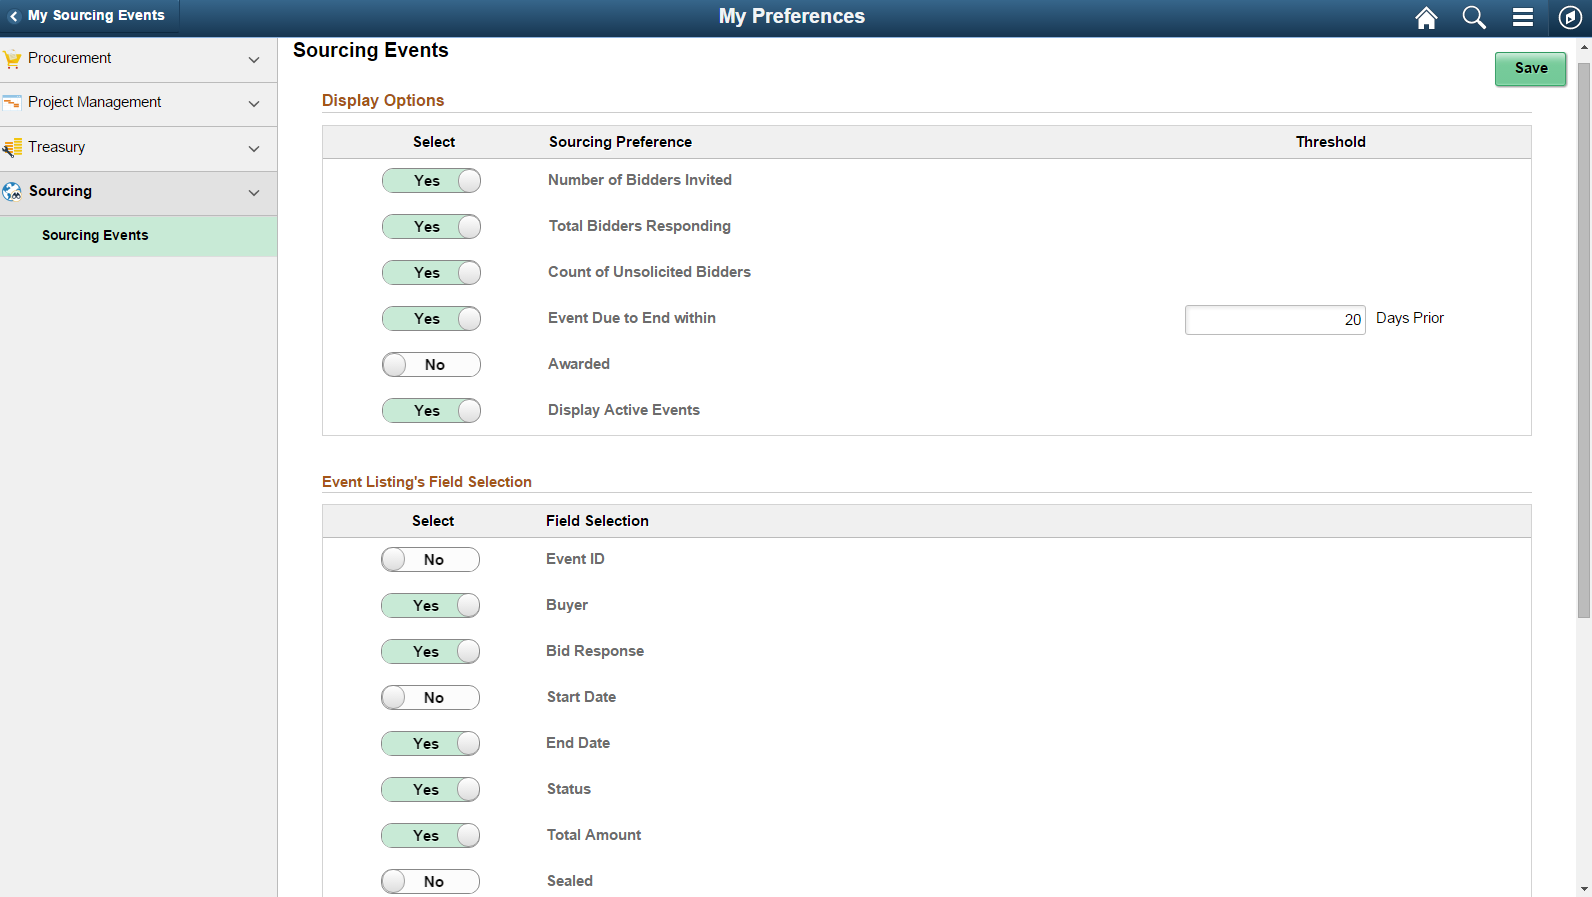 Procurement User Preferences - Sourcing Events Page